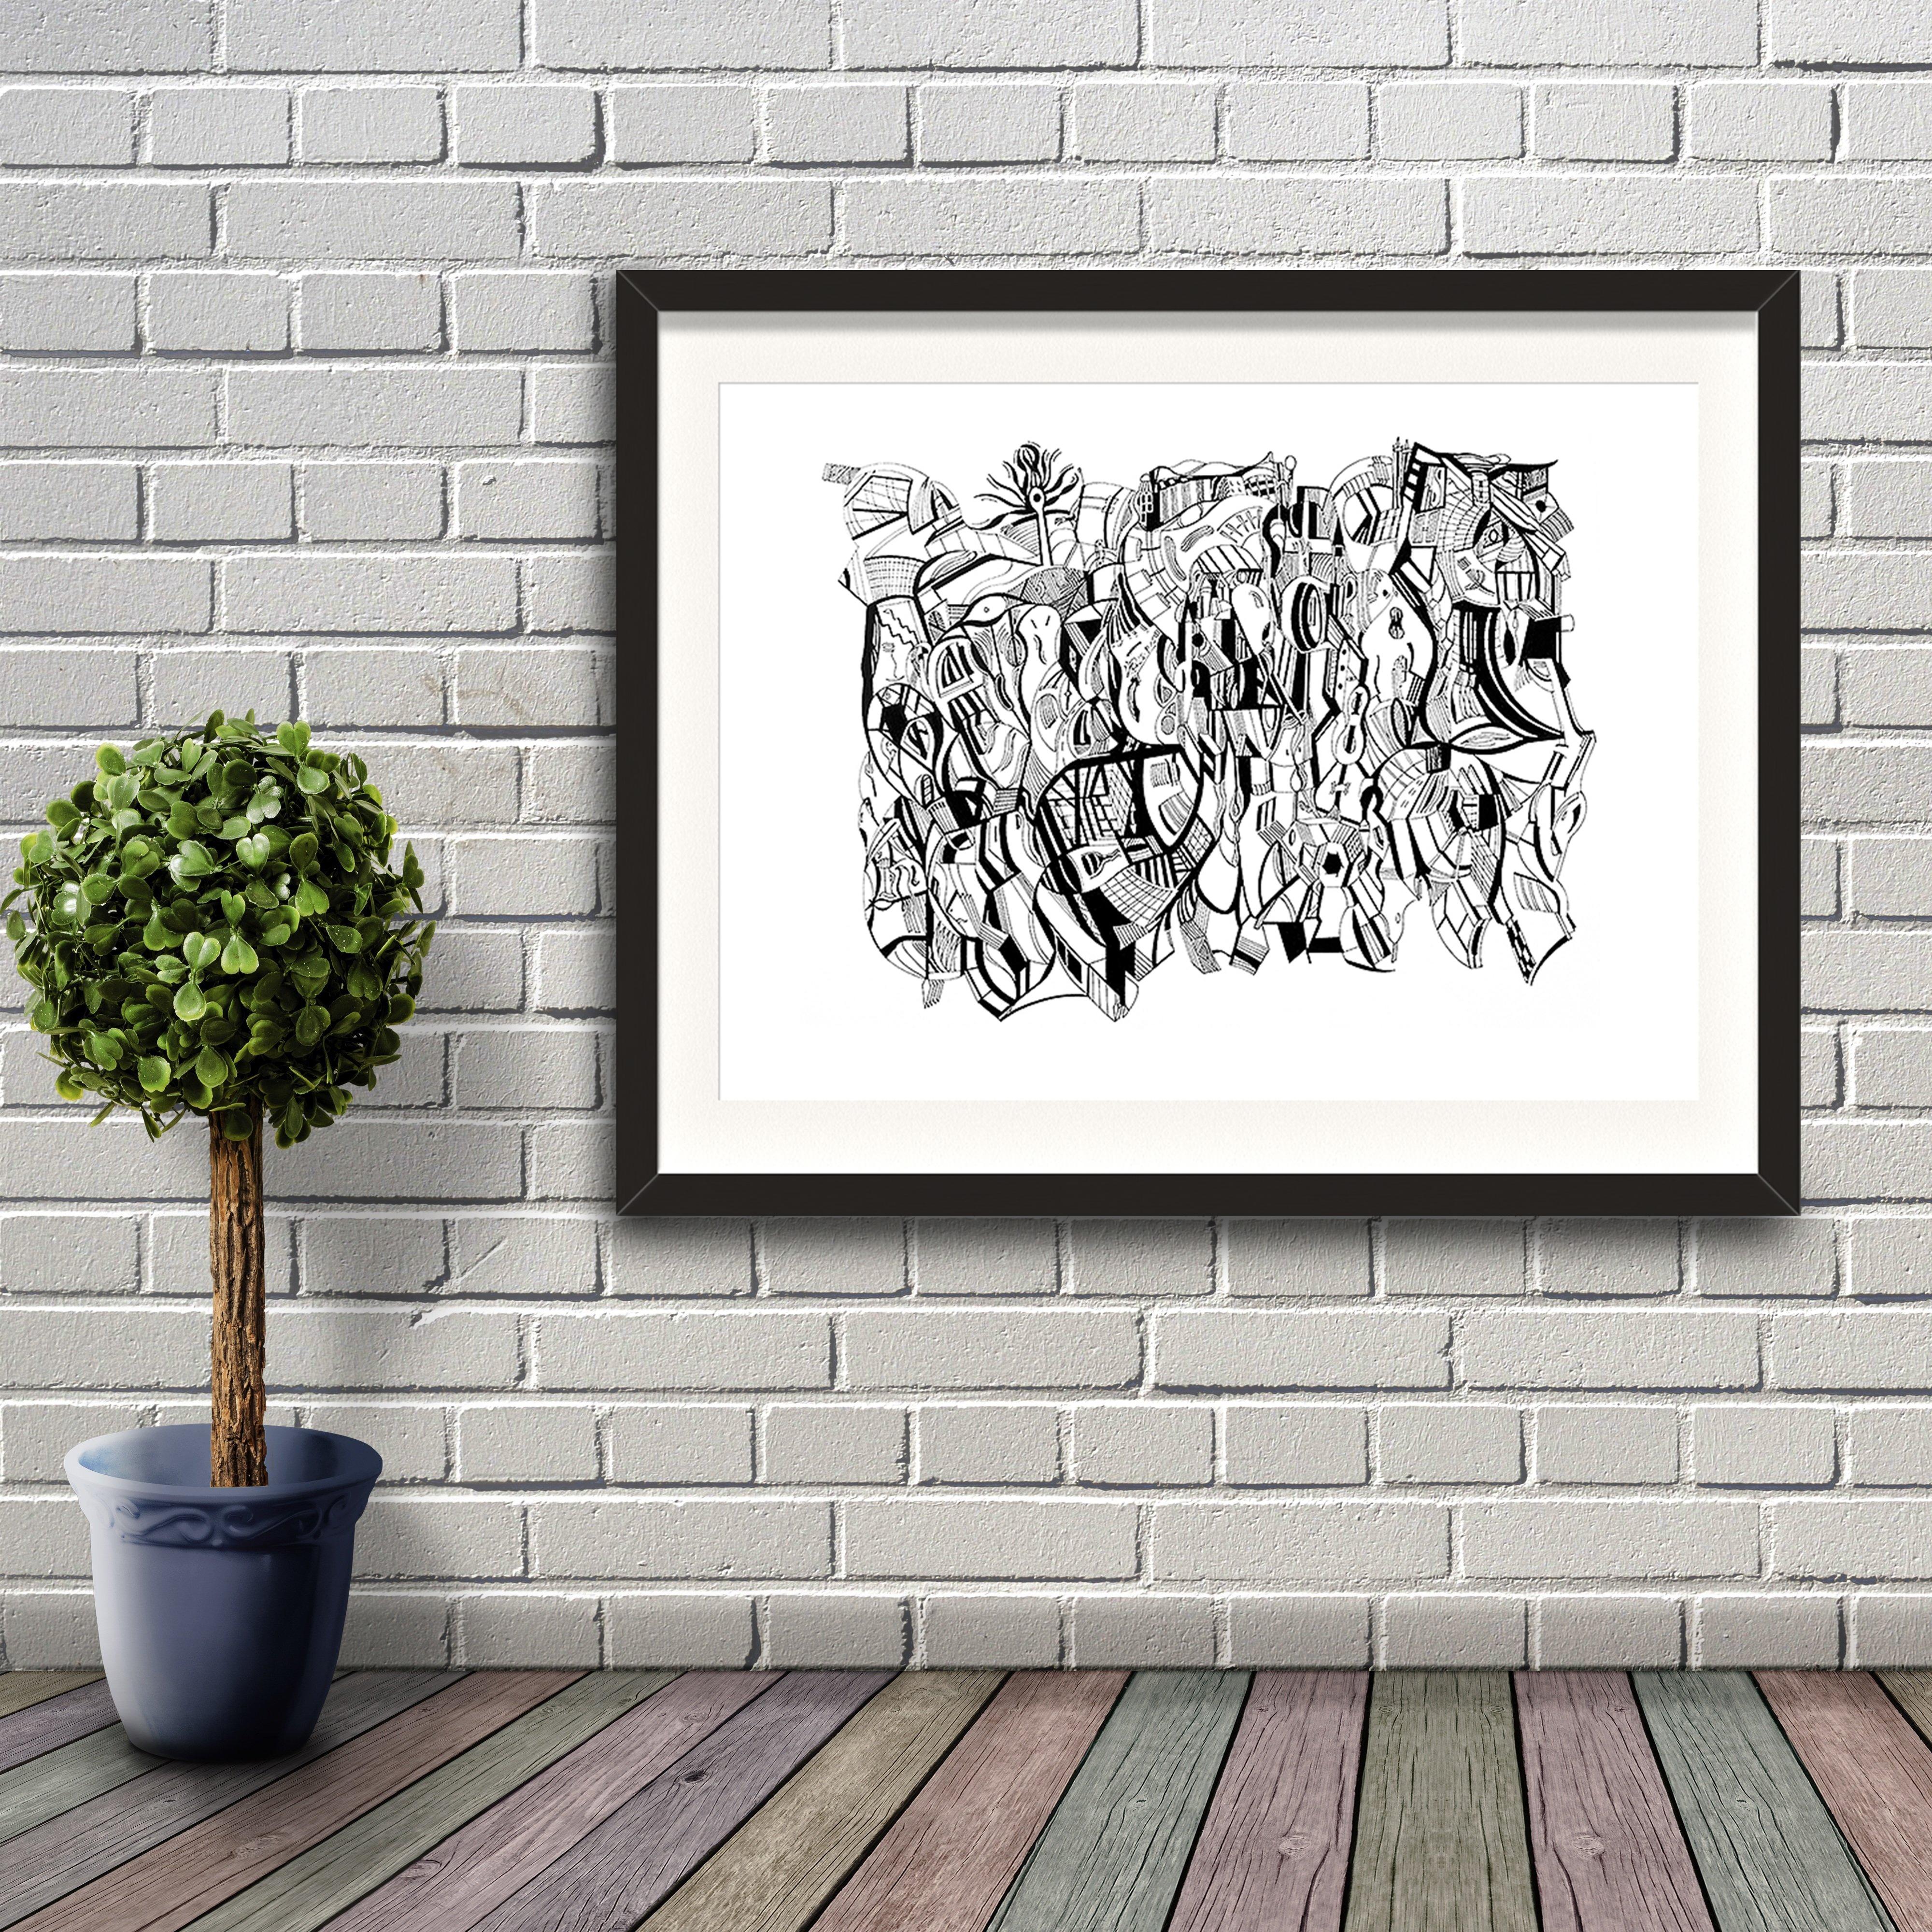 A fine art print from Jason Clarke titled Beacon drawn with a black Pentel pen. Artwork shown in a black frame hanging on a brick wall.